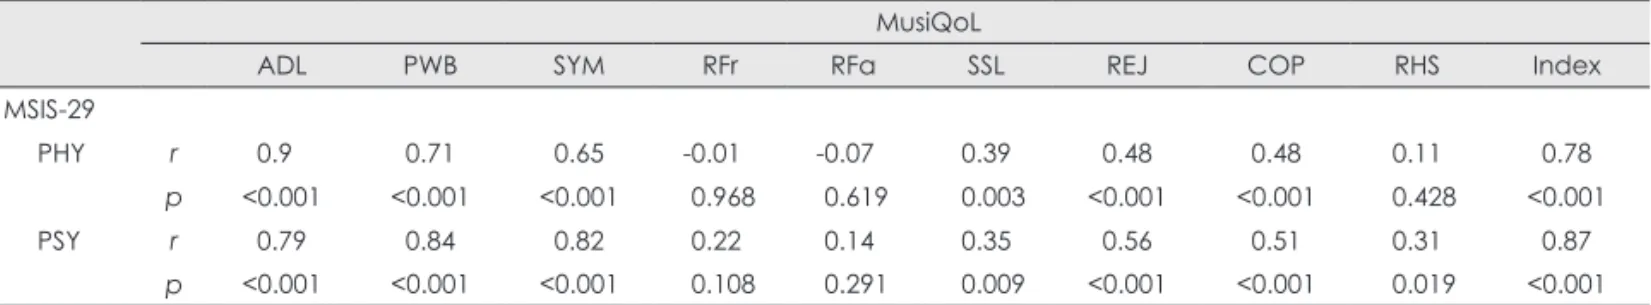 Table 5. Spearman’s correlation coefficients between dimension scores on the MusiQoL questionnaire and the MSIS-29 MusiQoL